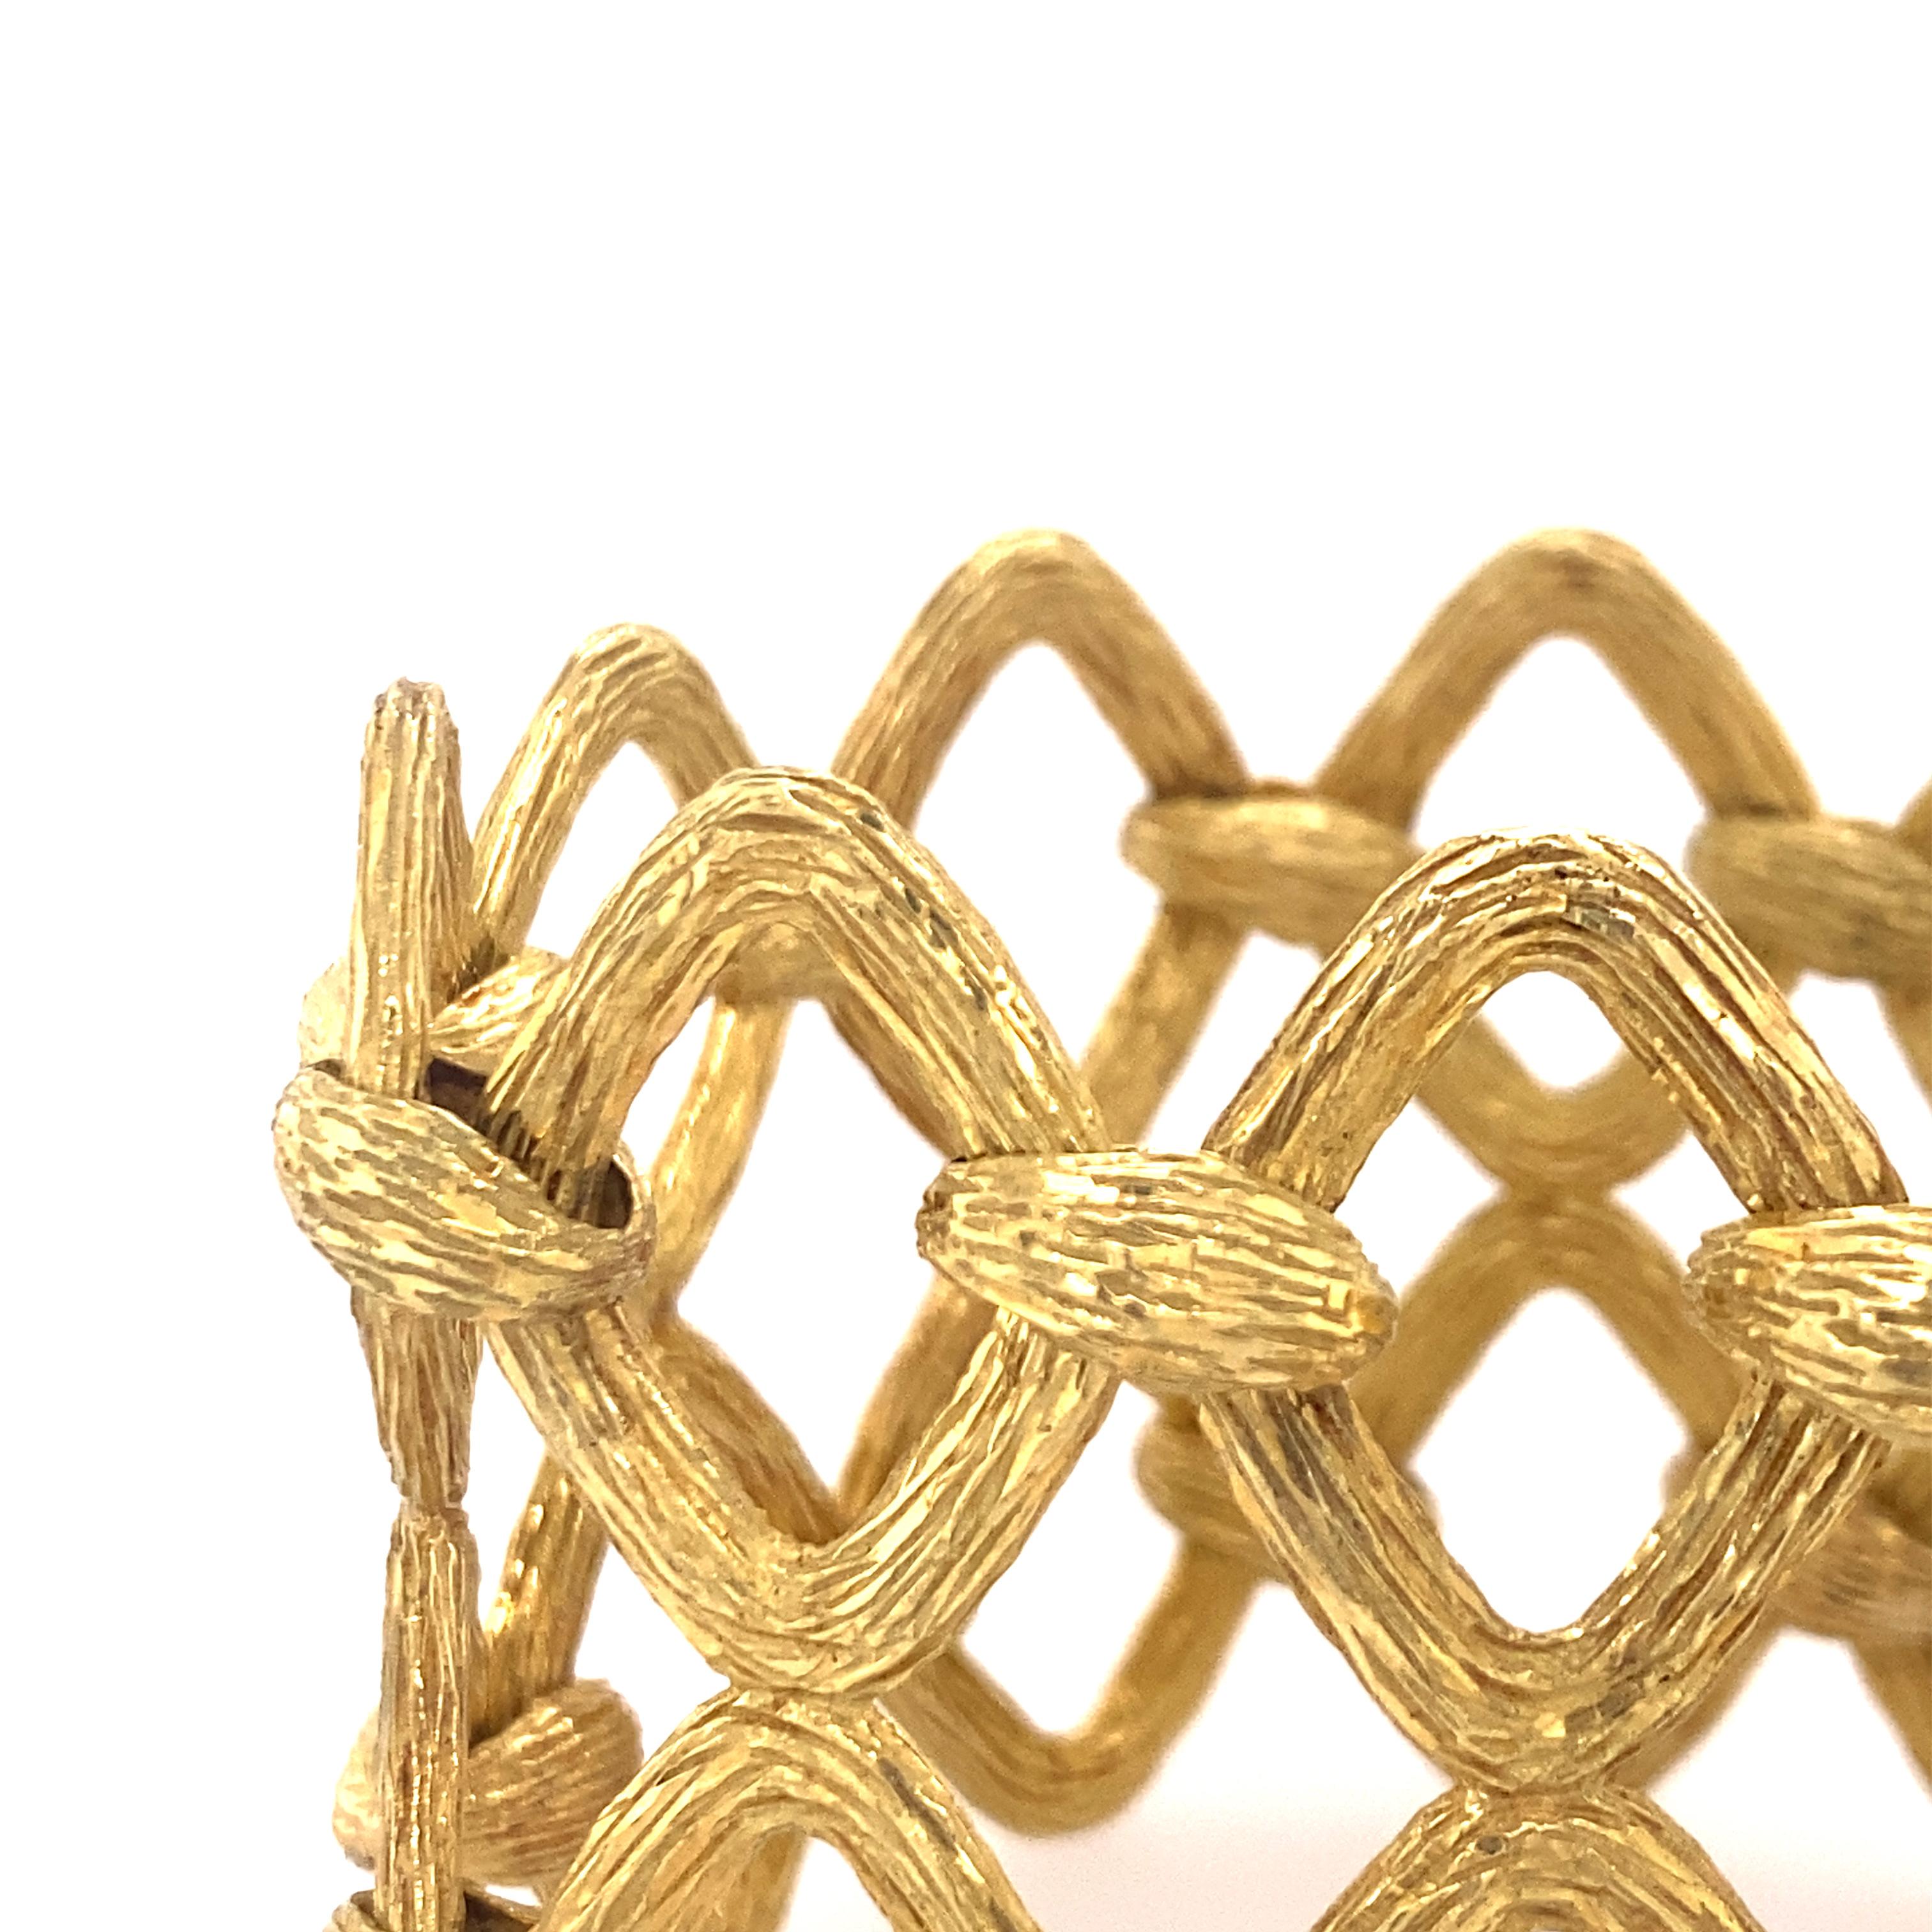 Tishman & Lipp 18k Gold Wide Link Bracelet In Excellent Condition For Sale In New York, NY